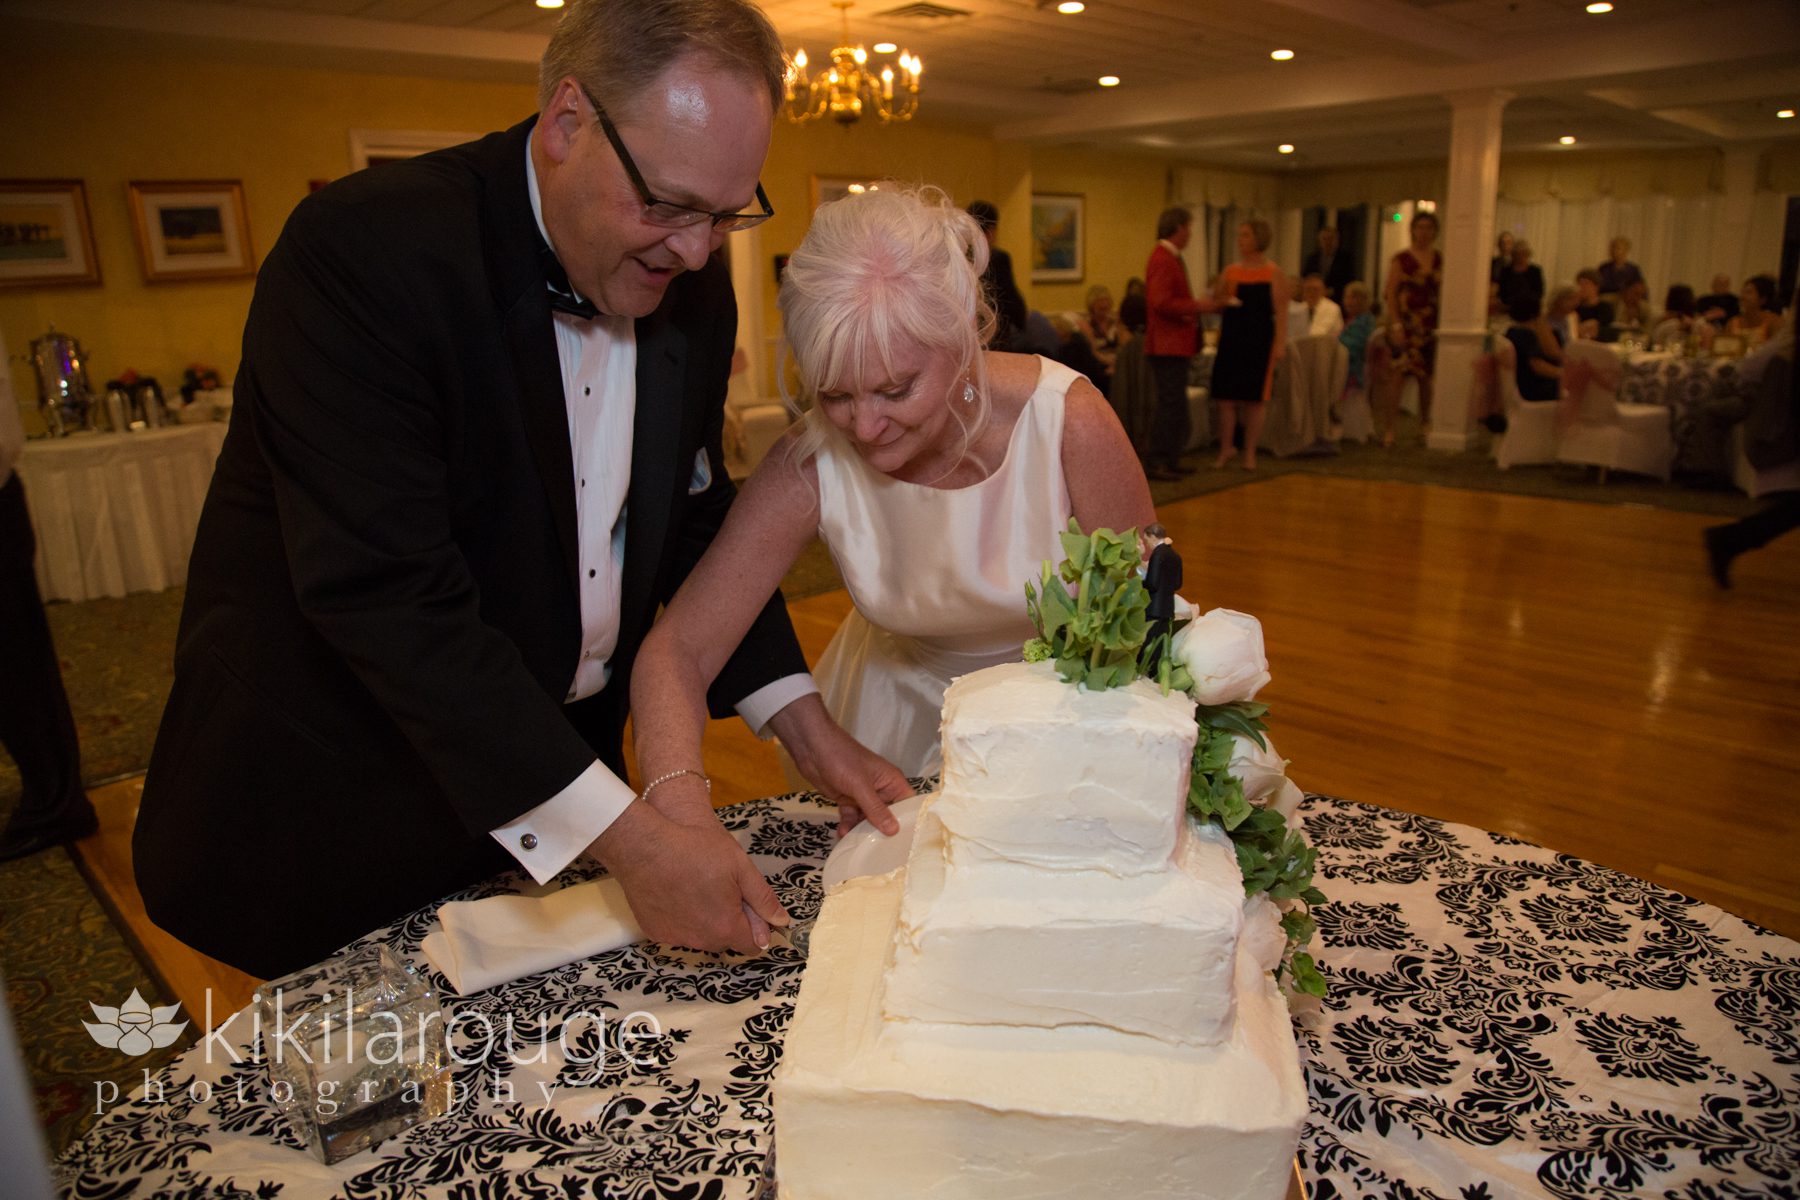 Cutting the cake at ceremony